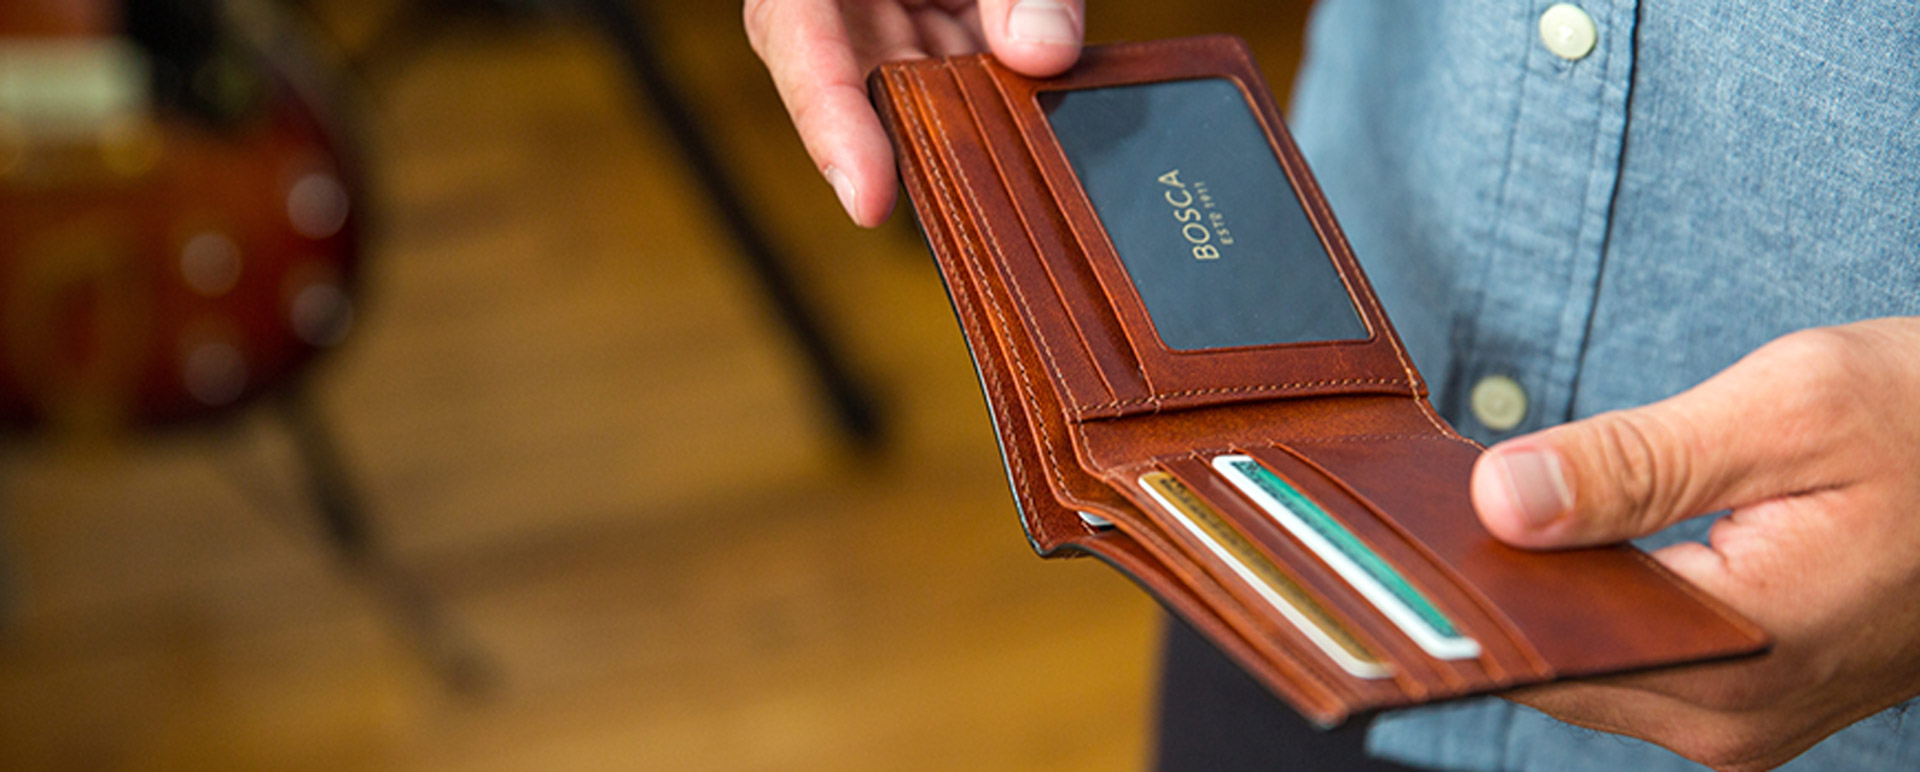 What Makes a Leather Wallet Great?